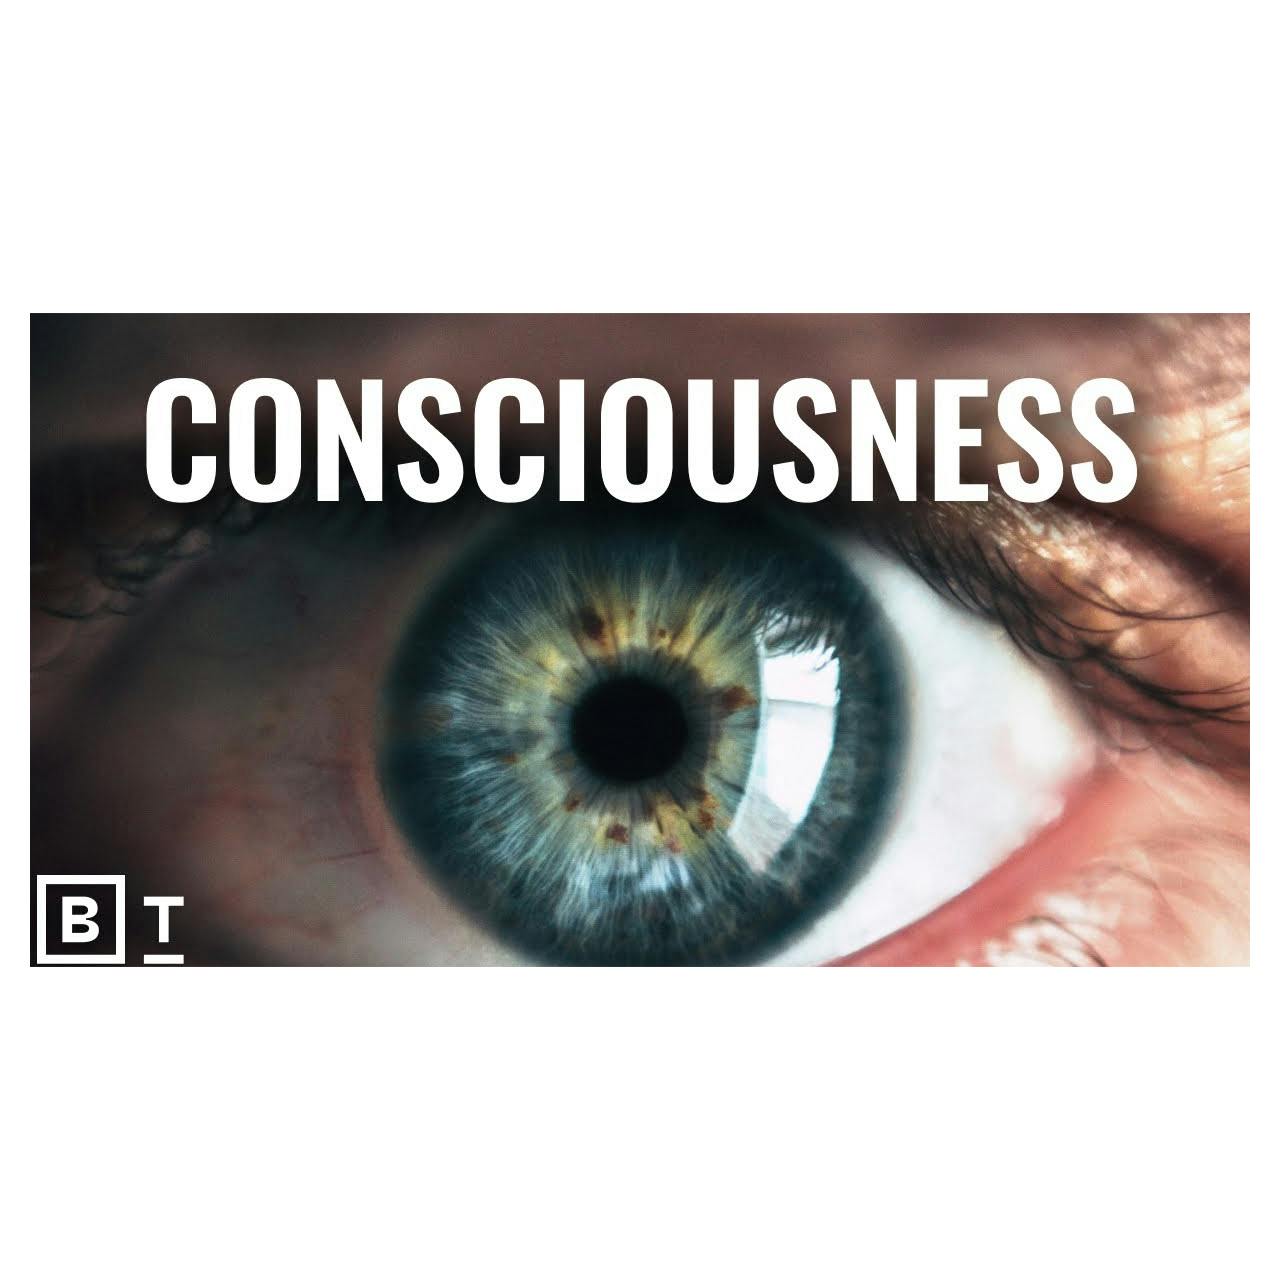 Is consciousness an illusion? 5 experts explain